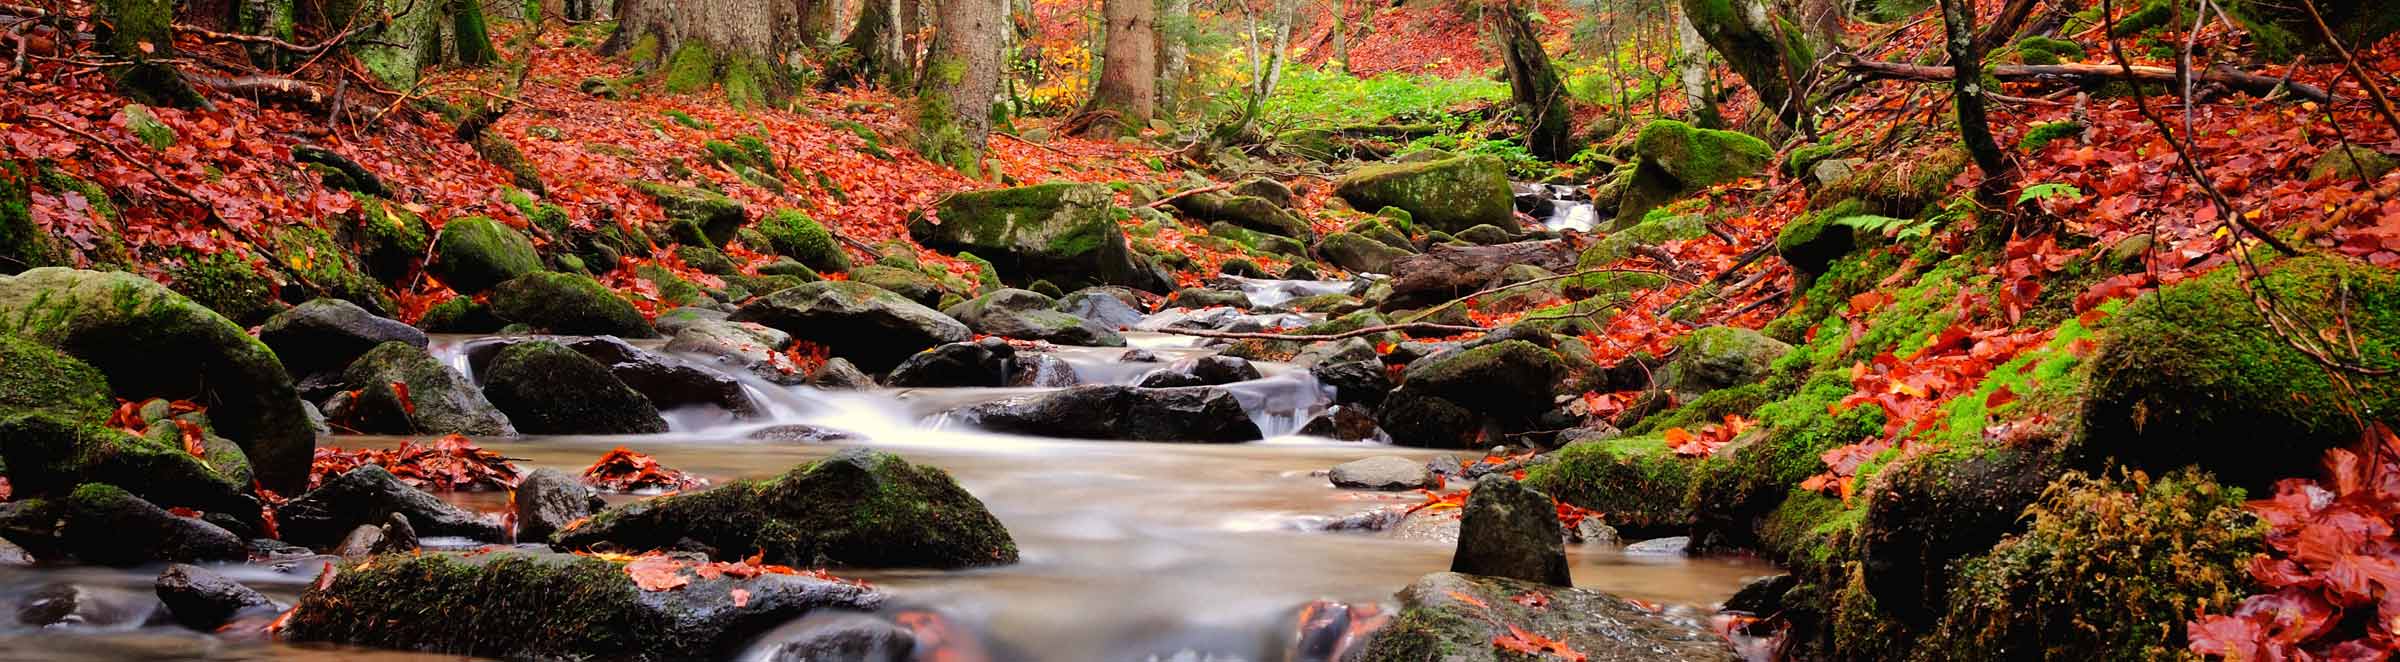 river in the fall with moss rocks